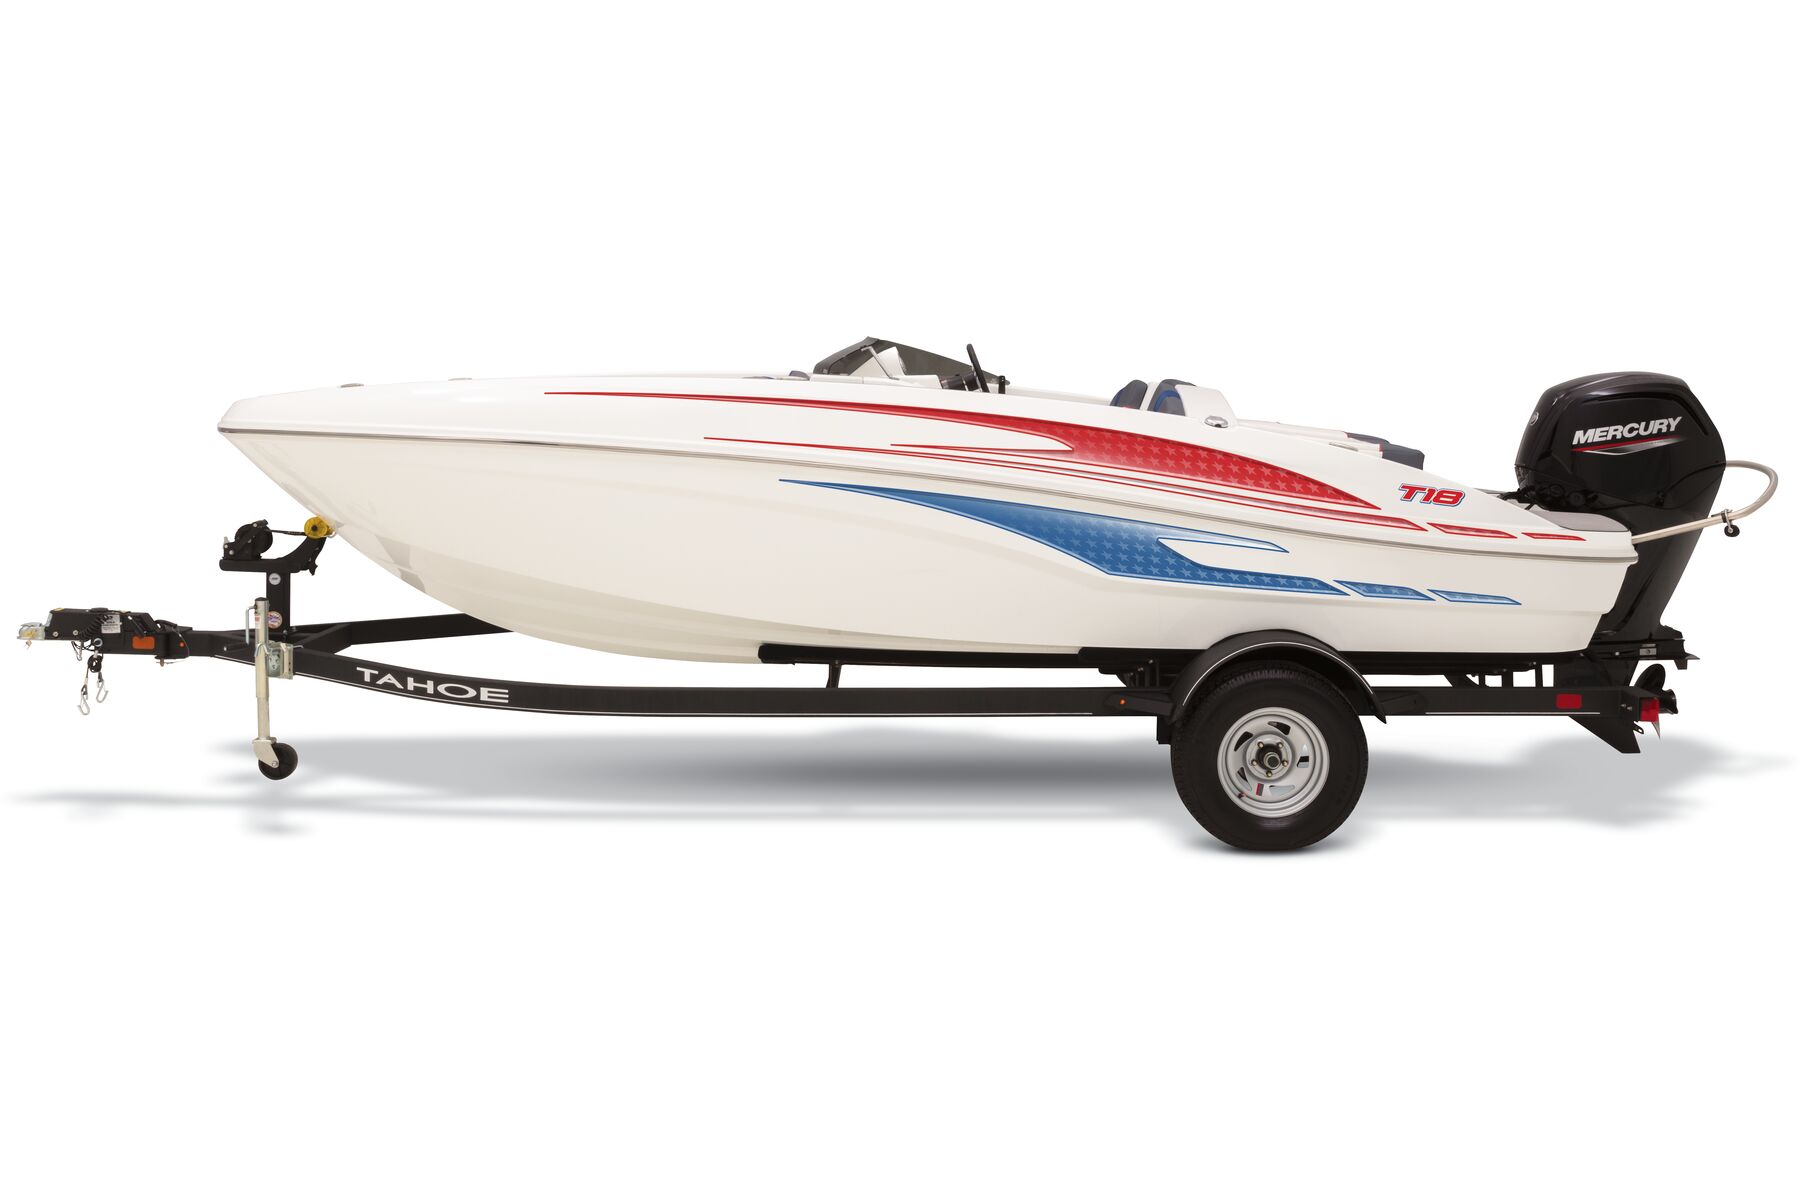 T18 - TAHOE Bowrider Runabout Boat